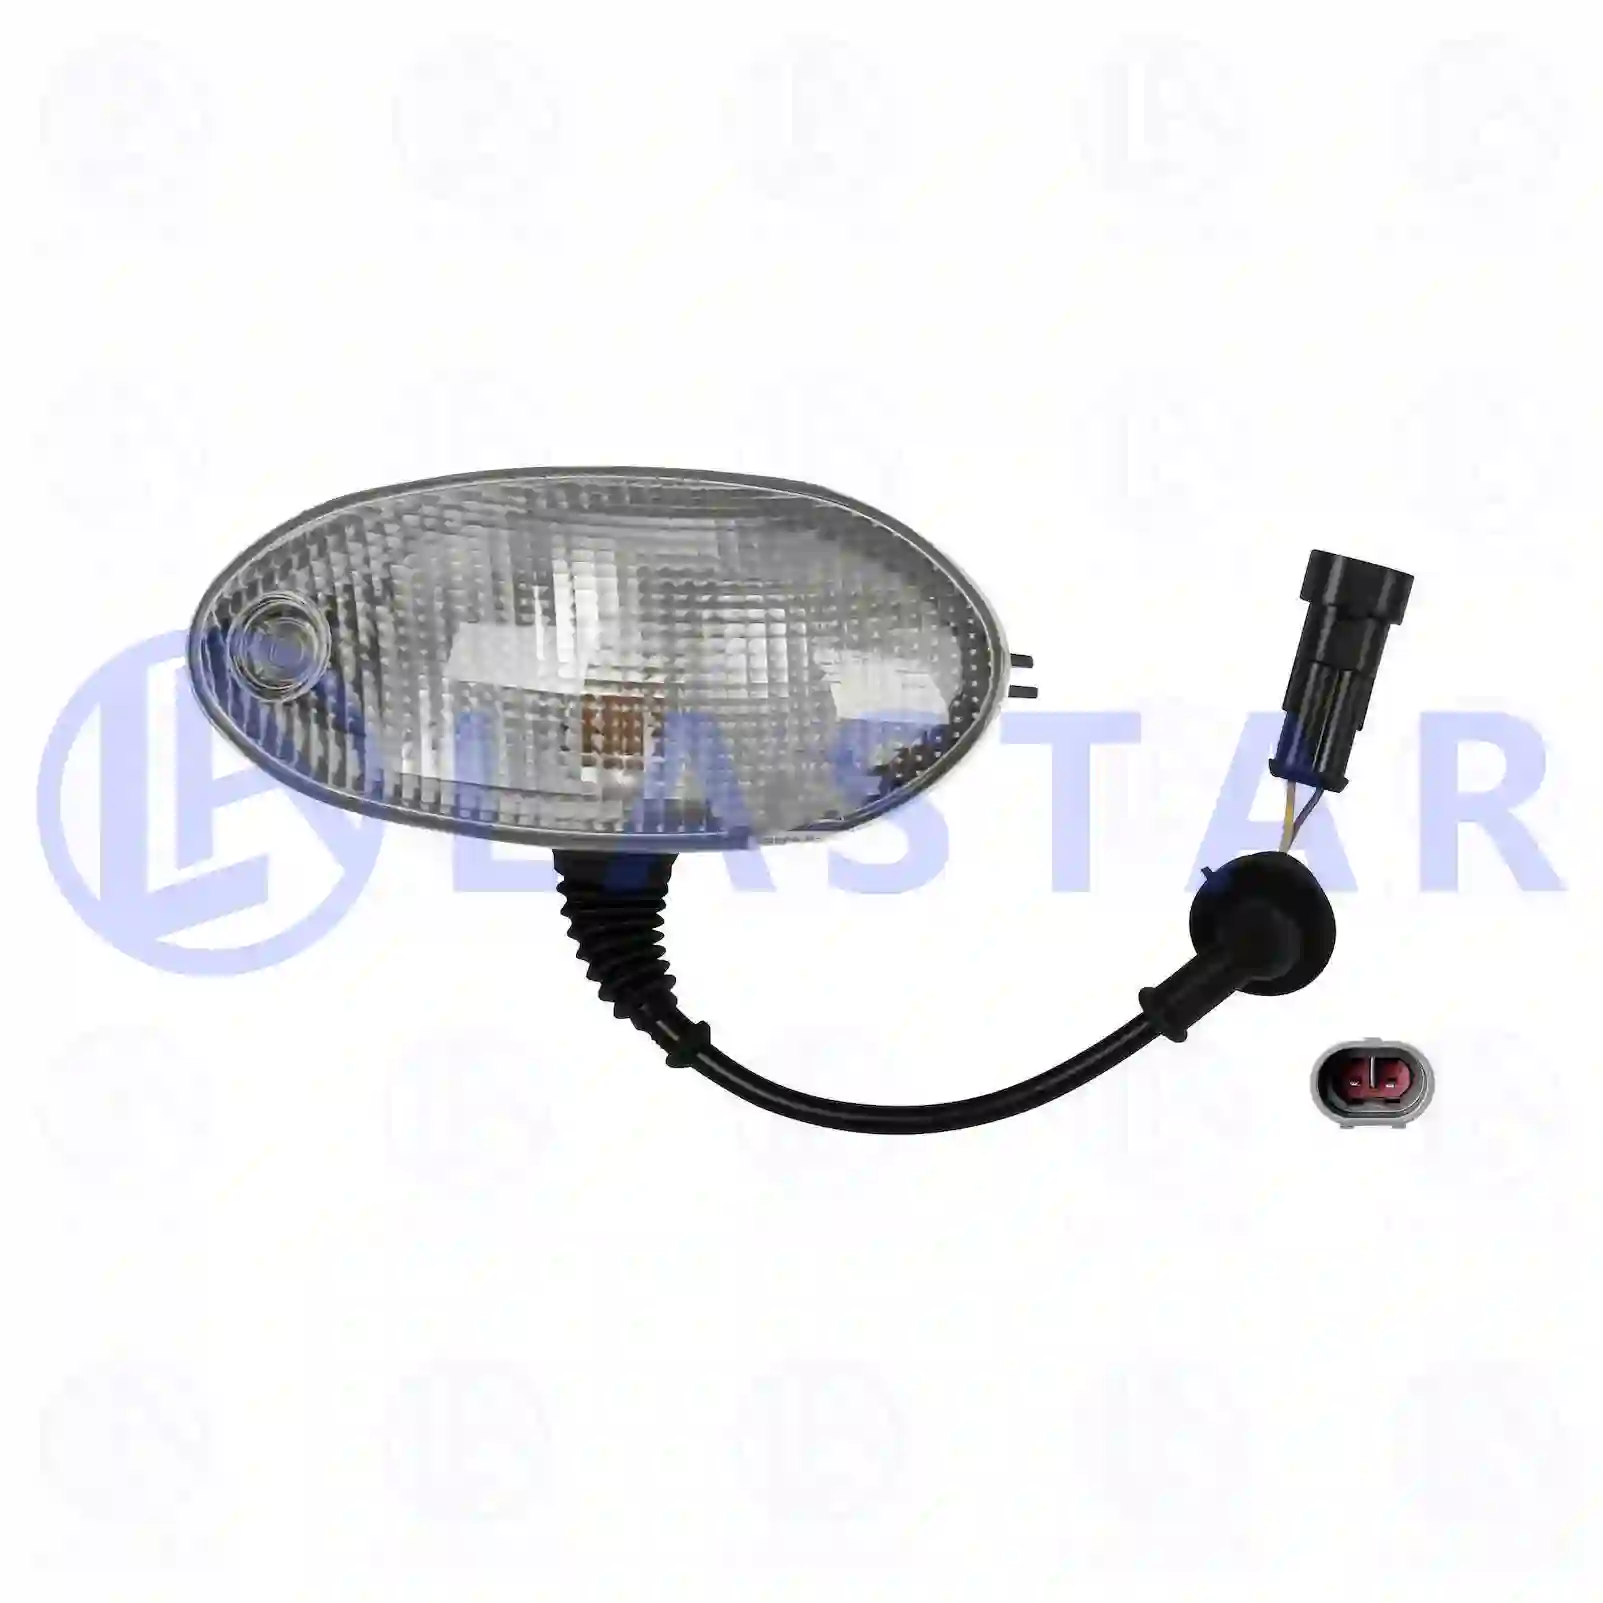 Position lamp, sun visor, right, with bulb, 77713000, 504074031, ZG20700-0008 ||  77713000 Lastar Spare Part | Truck Spare Parts, Auotomotive Spare Parts Position lamp, sun visor, right, with bulb, 77713000, 504074031, ZG20700-0008 ||  77713000 Lastar Spare Part | Truck Spare Parts, Auotomotive Spare Parts